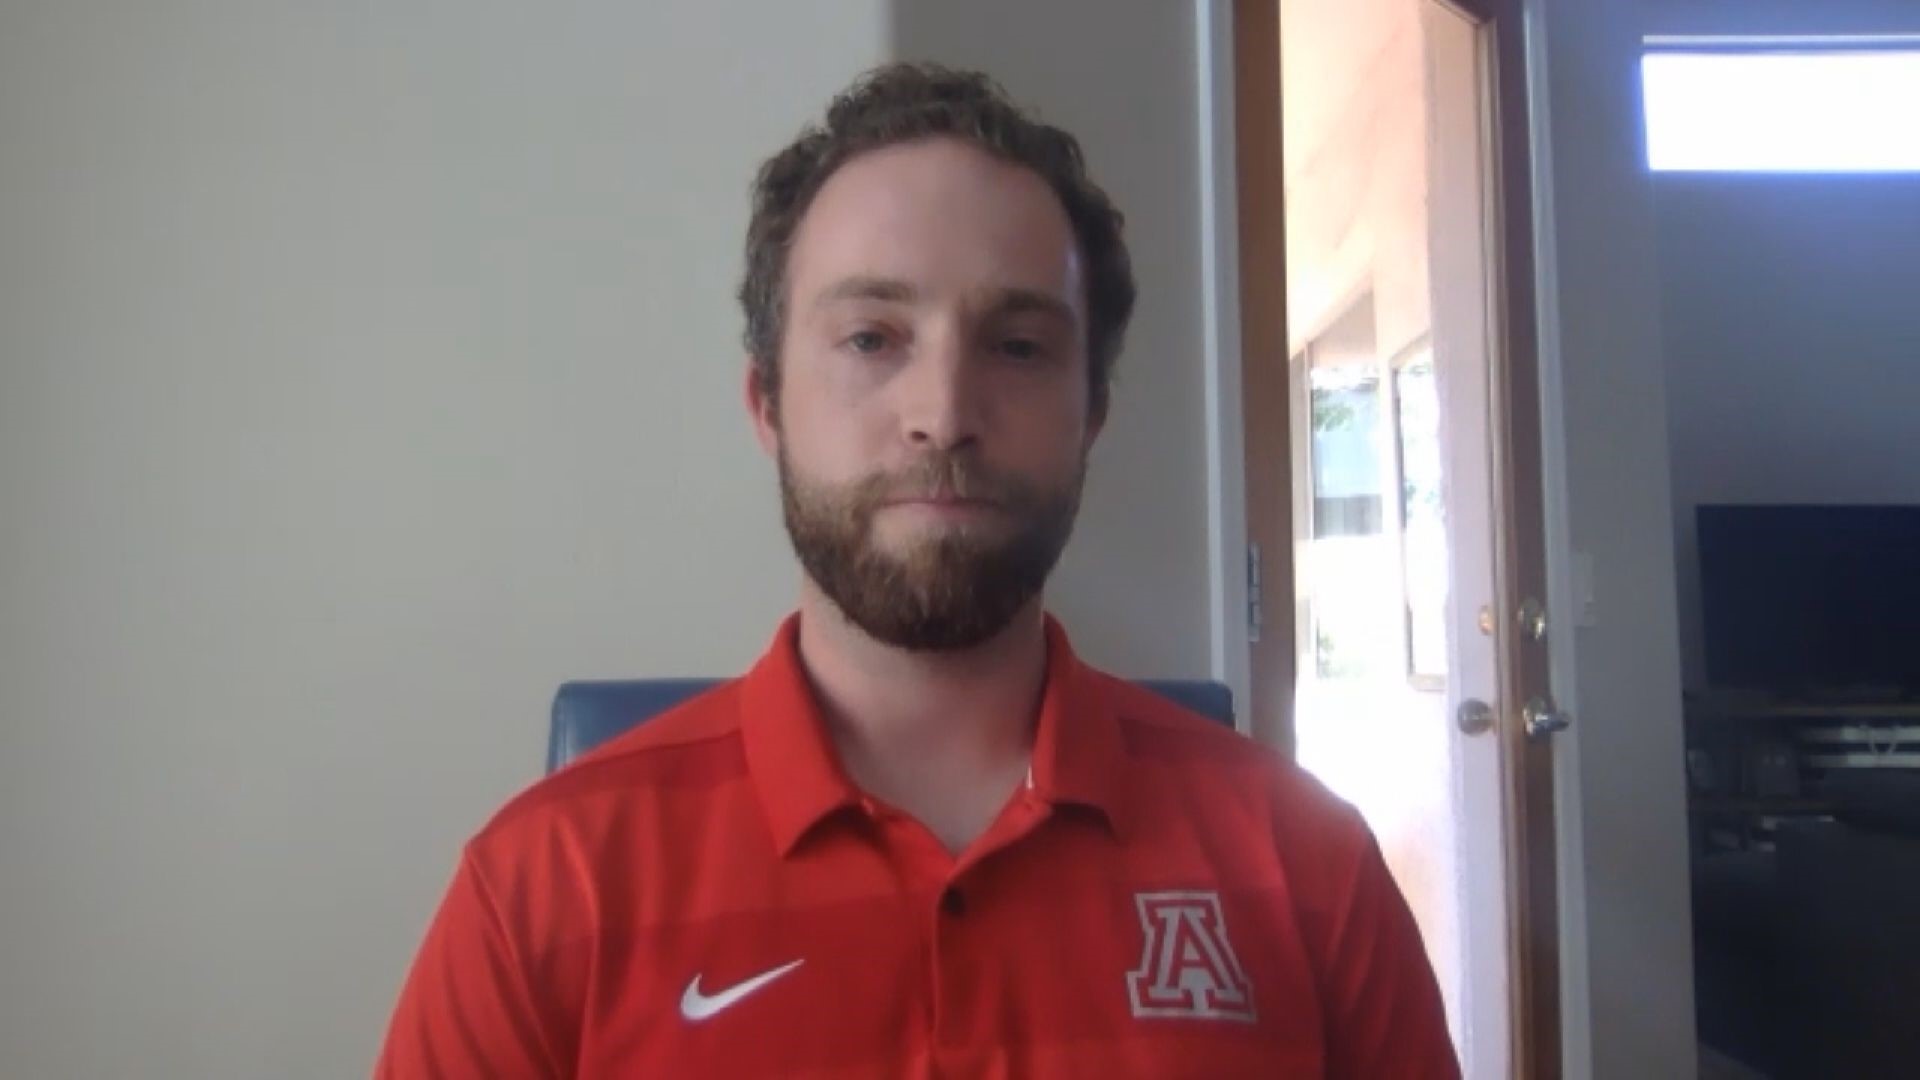 Team 12's Chierstin Susel talked to Dr. Alex Auerbach, director of clinical psychology at UArizona about the increase in demand for mental health resources.